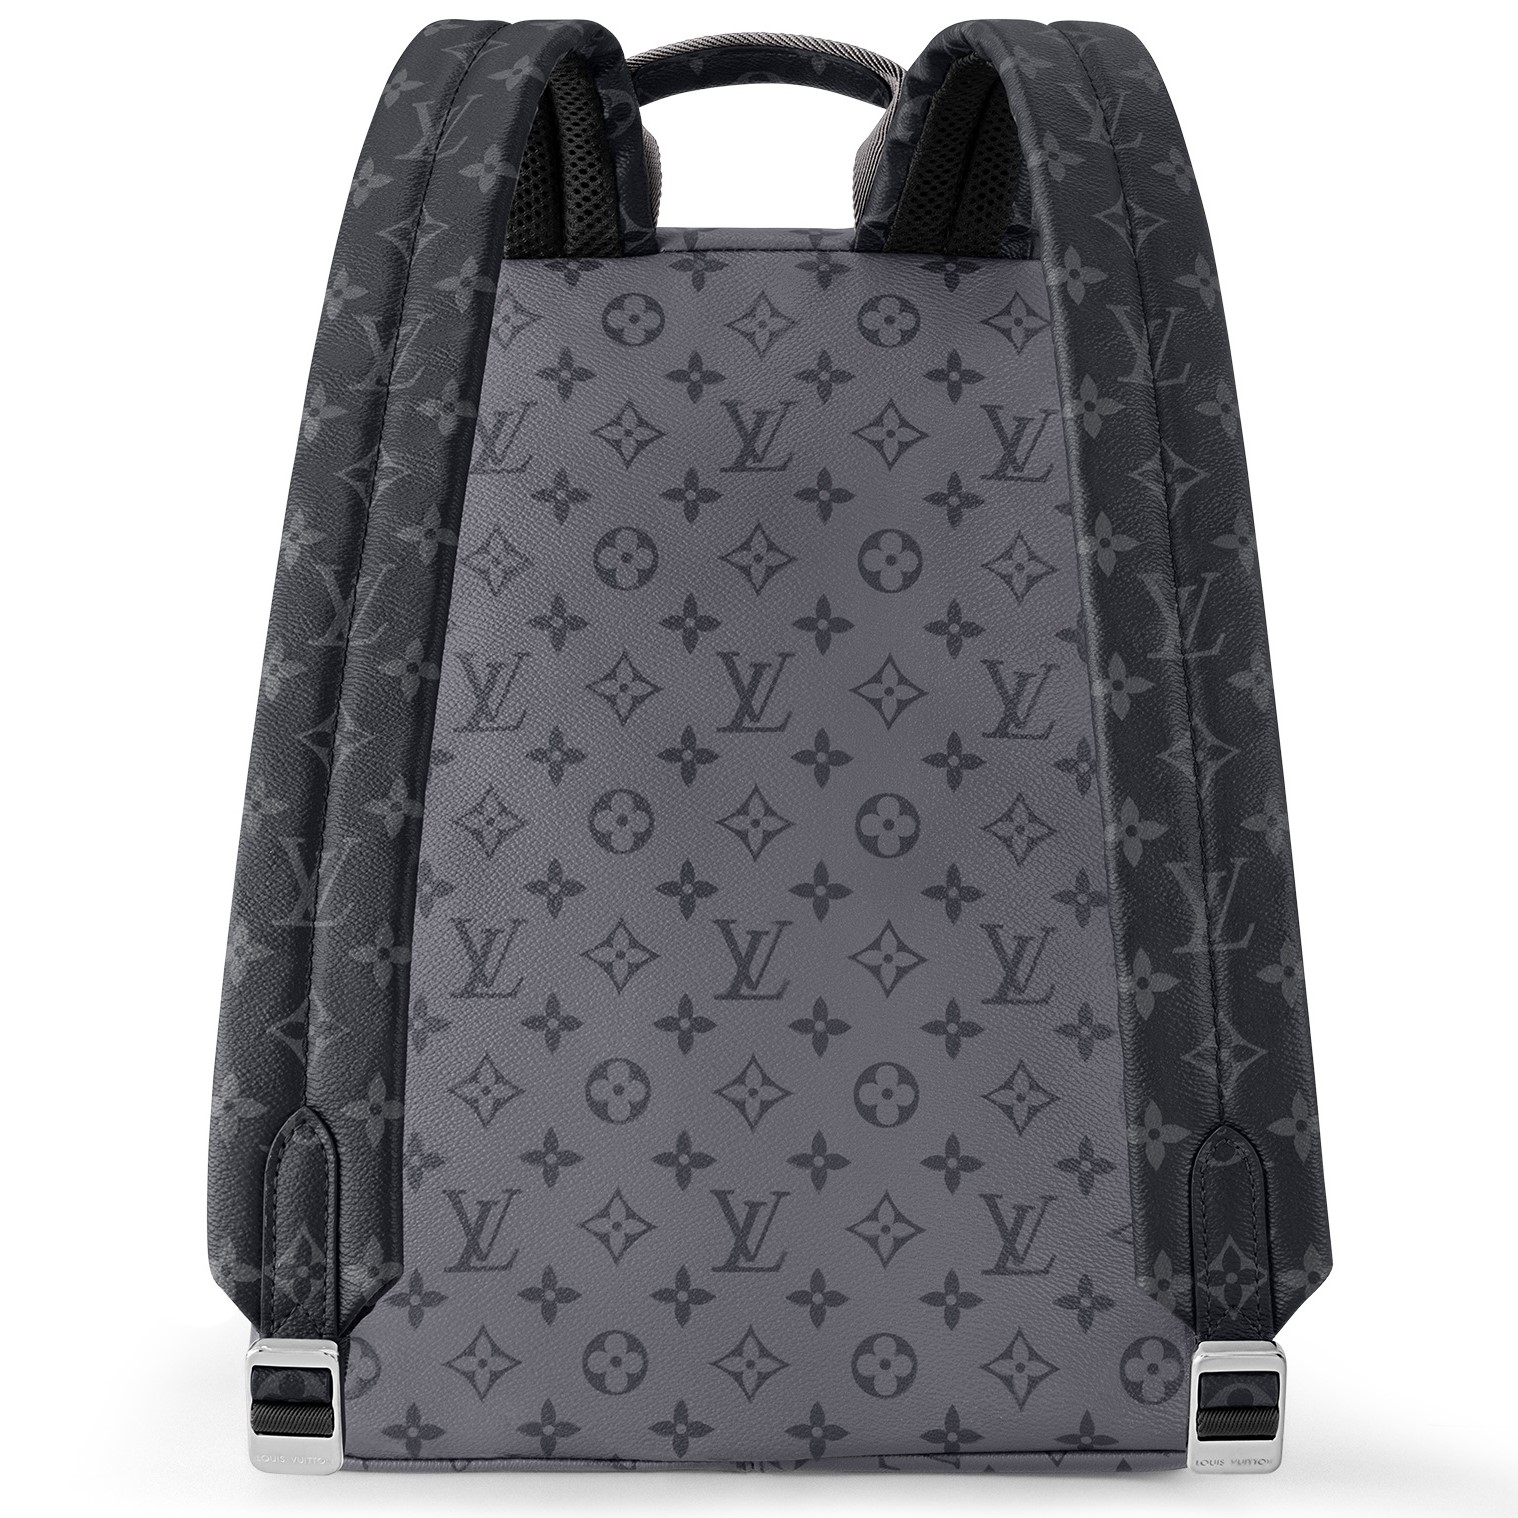 BALO NAM LIMITED LOUIS VUITTON LV DISCOVERY BACKPACK MONOGRAM ECLIPSE CANVAS 6